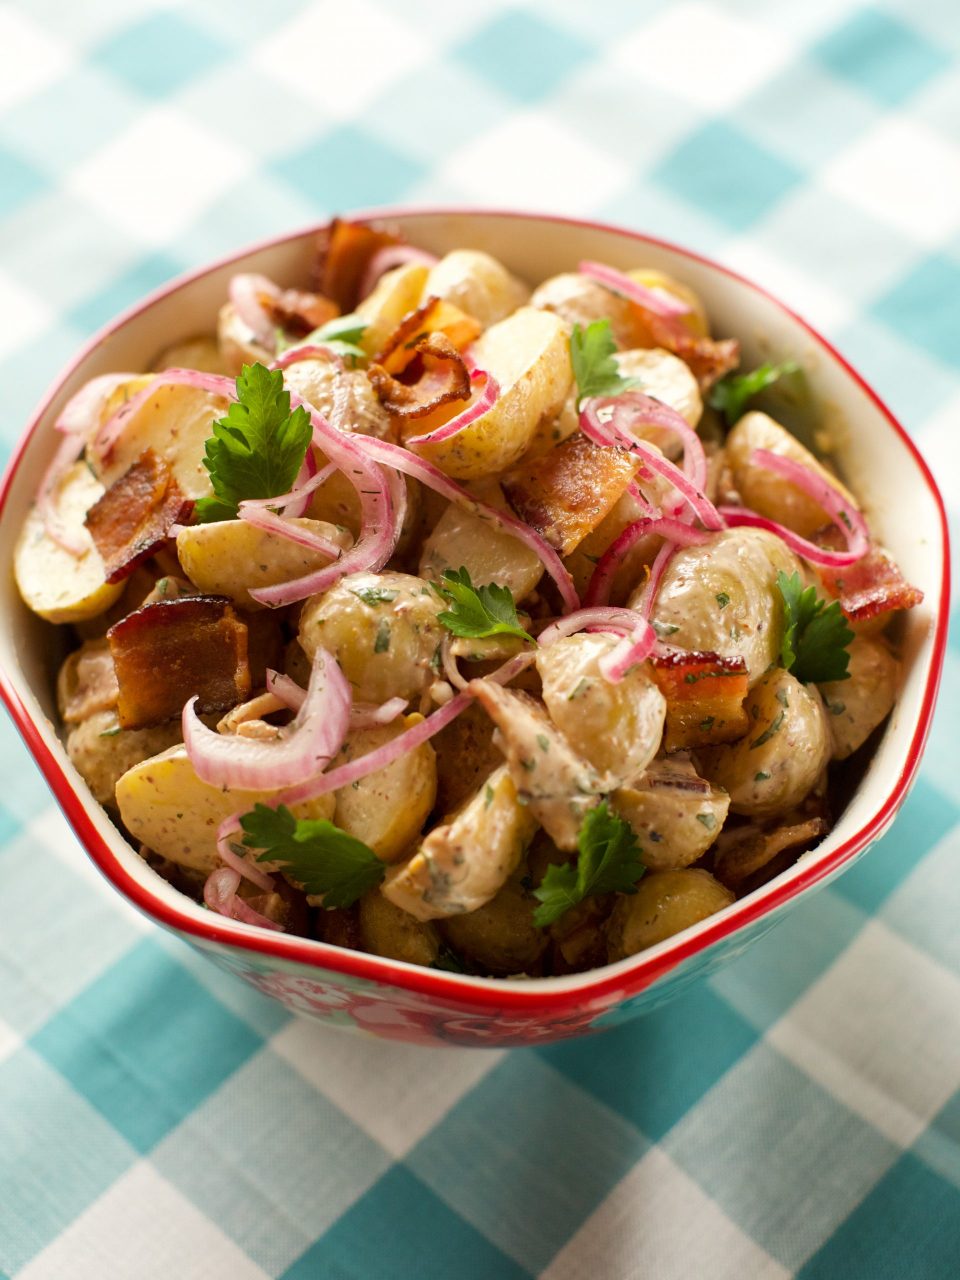 Ree Drummond's BBQ Potato Salad, as seen on The Pioneer Woman.